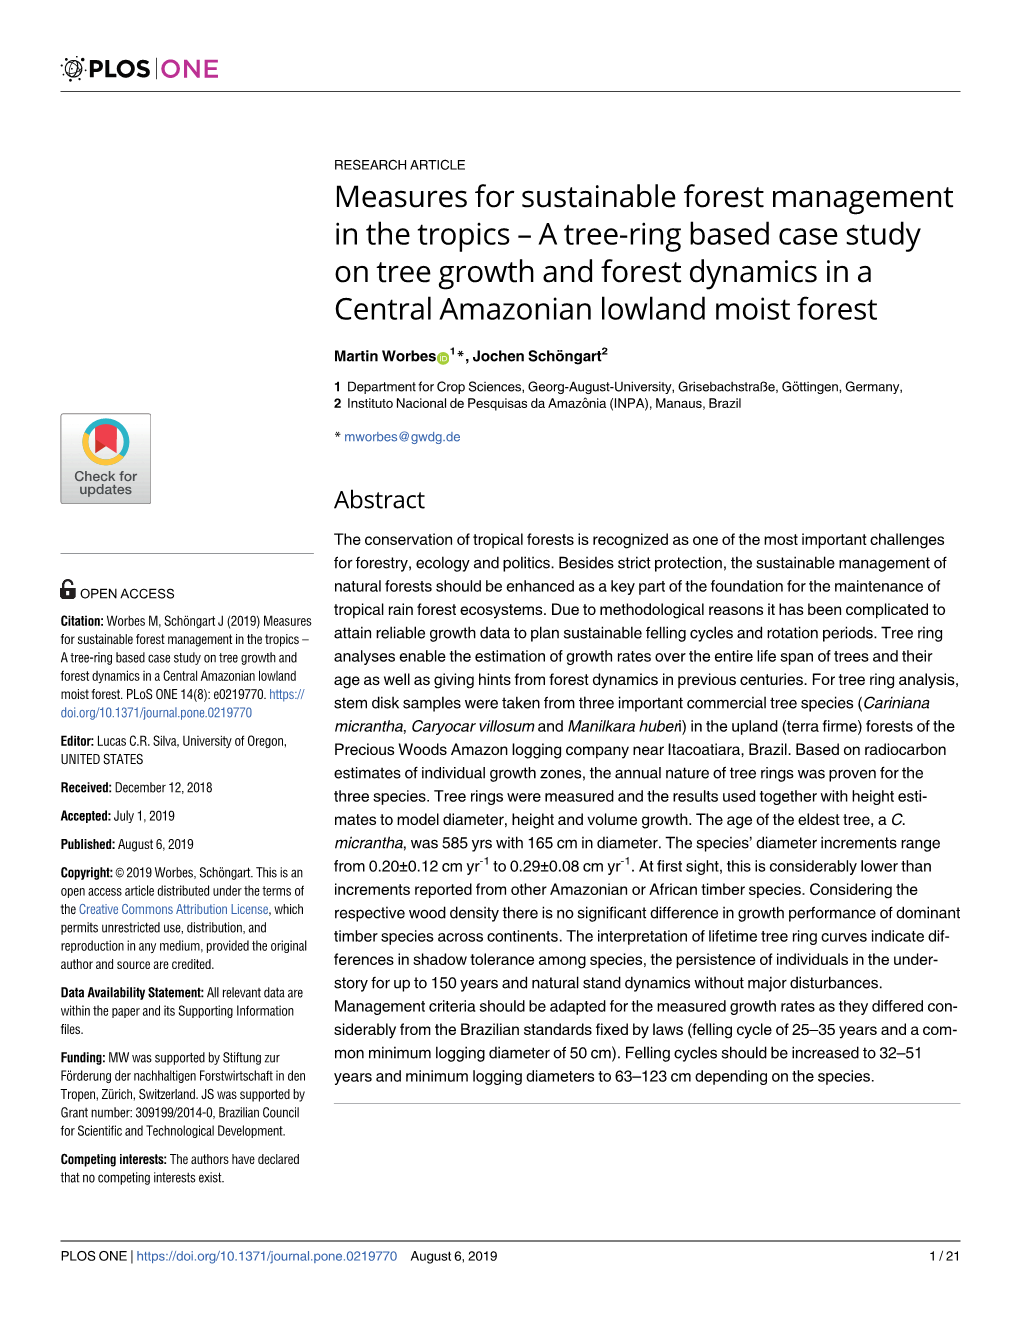 Measures for Sustainable Forest Management In